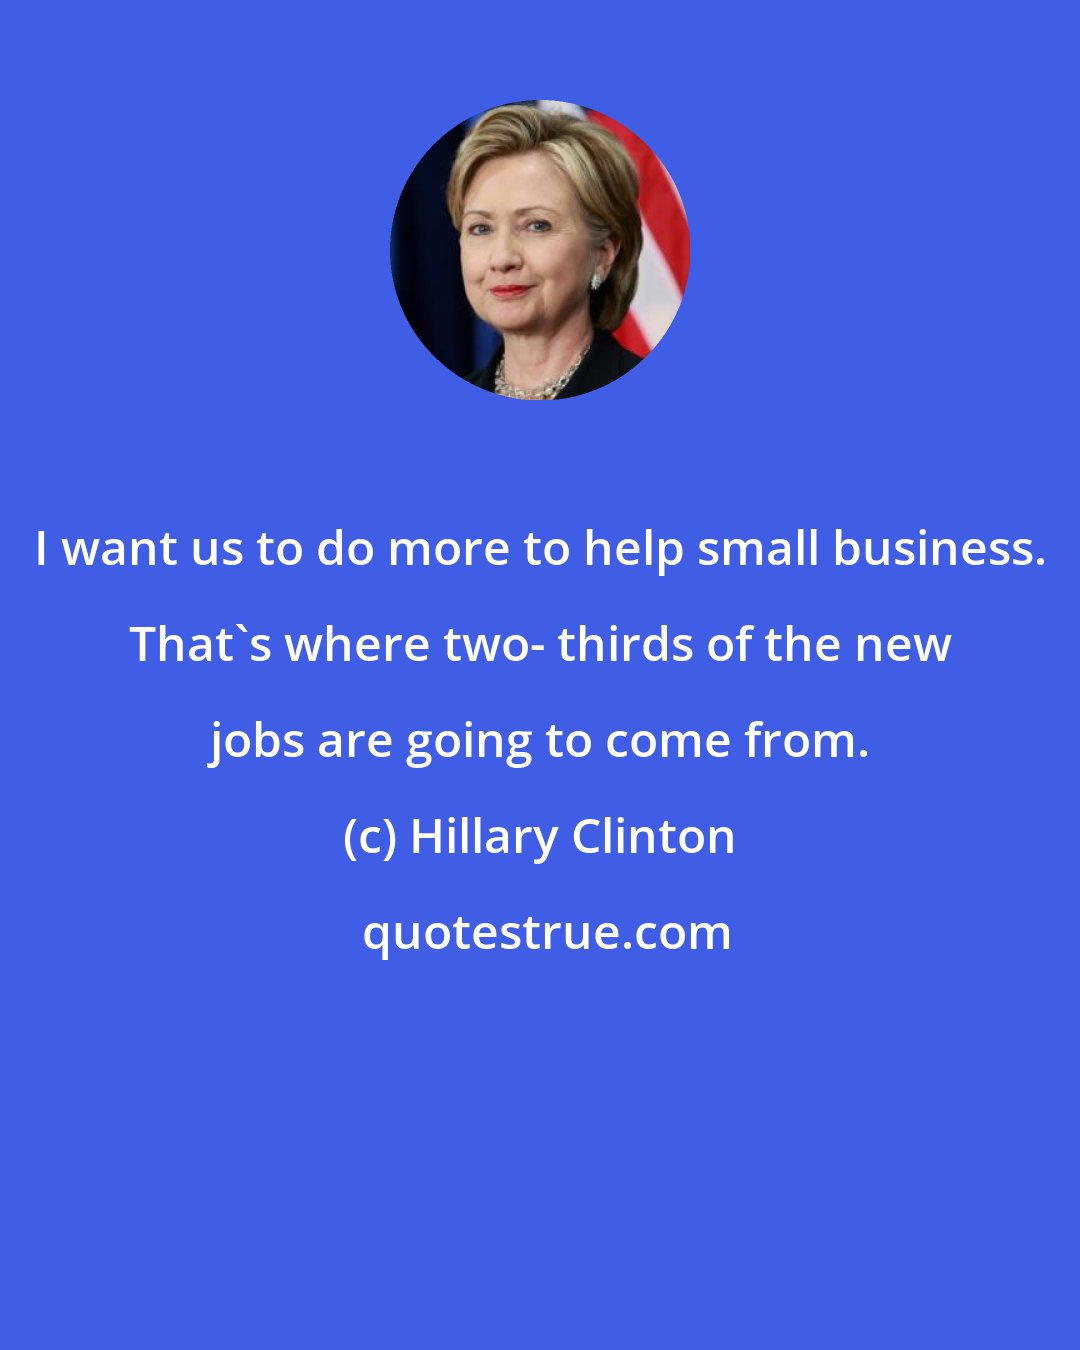 Hillary Clinton: I want us to do more to help small business. That's where two- thirds of the new jobs are going to come from.